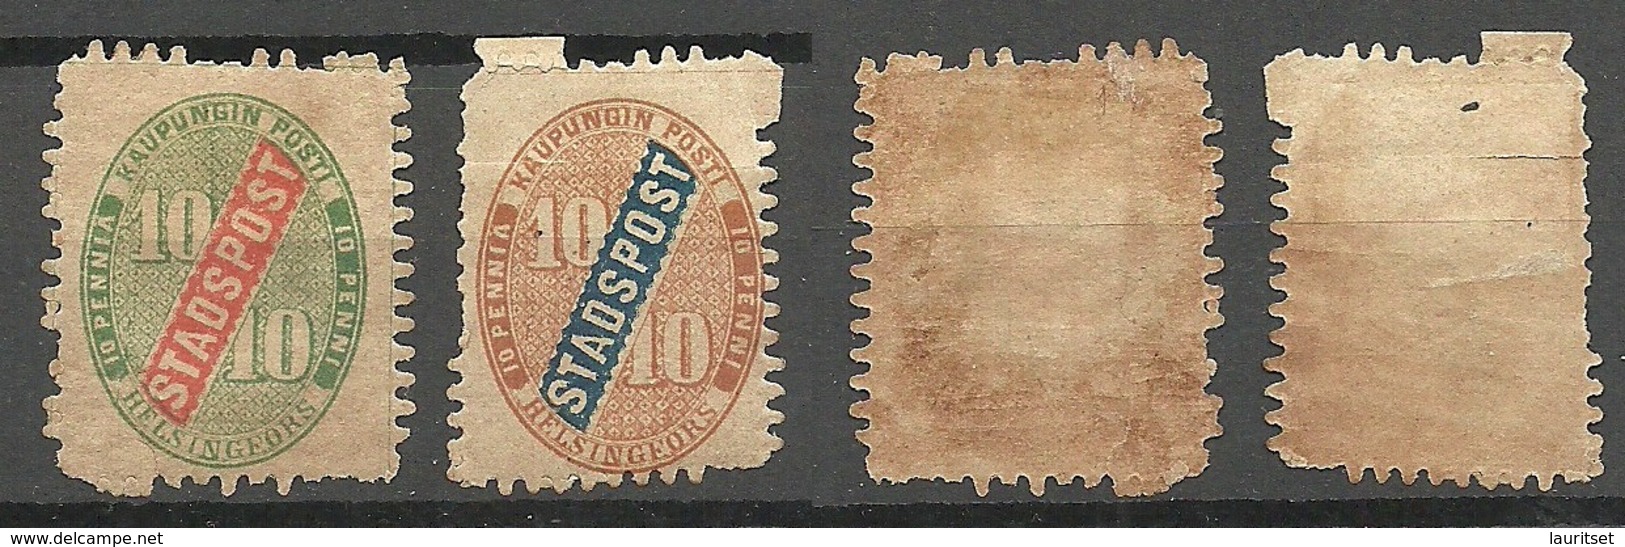 FINLAND HELSINKI 1866/68 Local City Post Stadtpost (*) NB! FAULTS! - Local Post Stamps